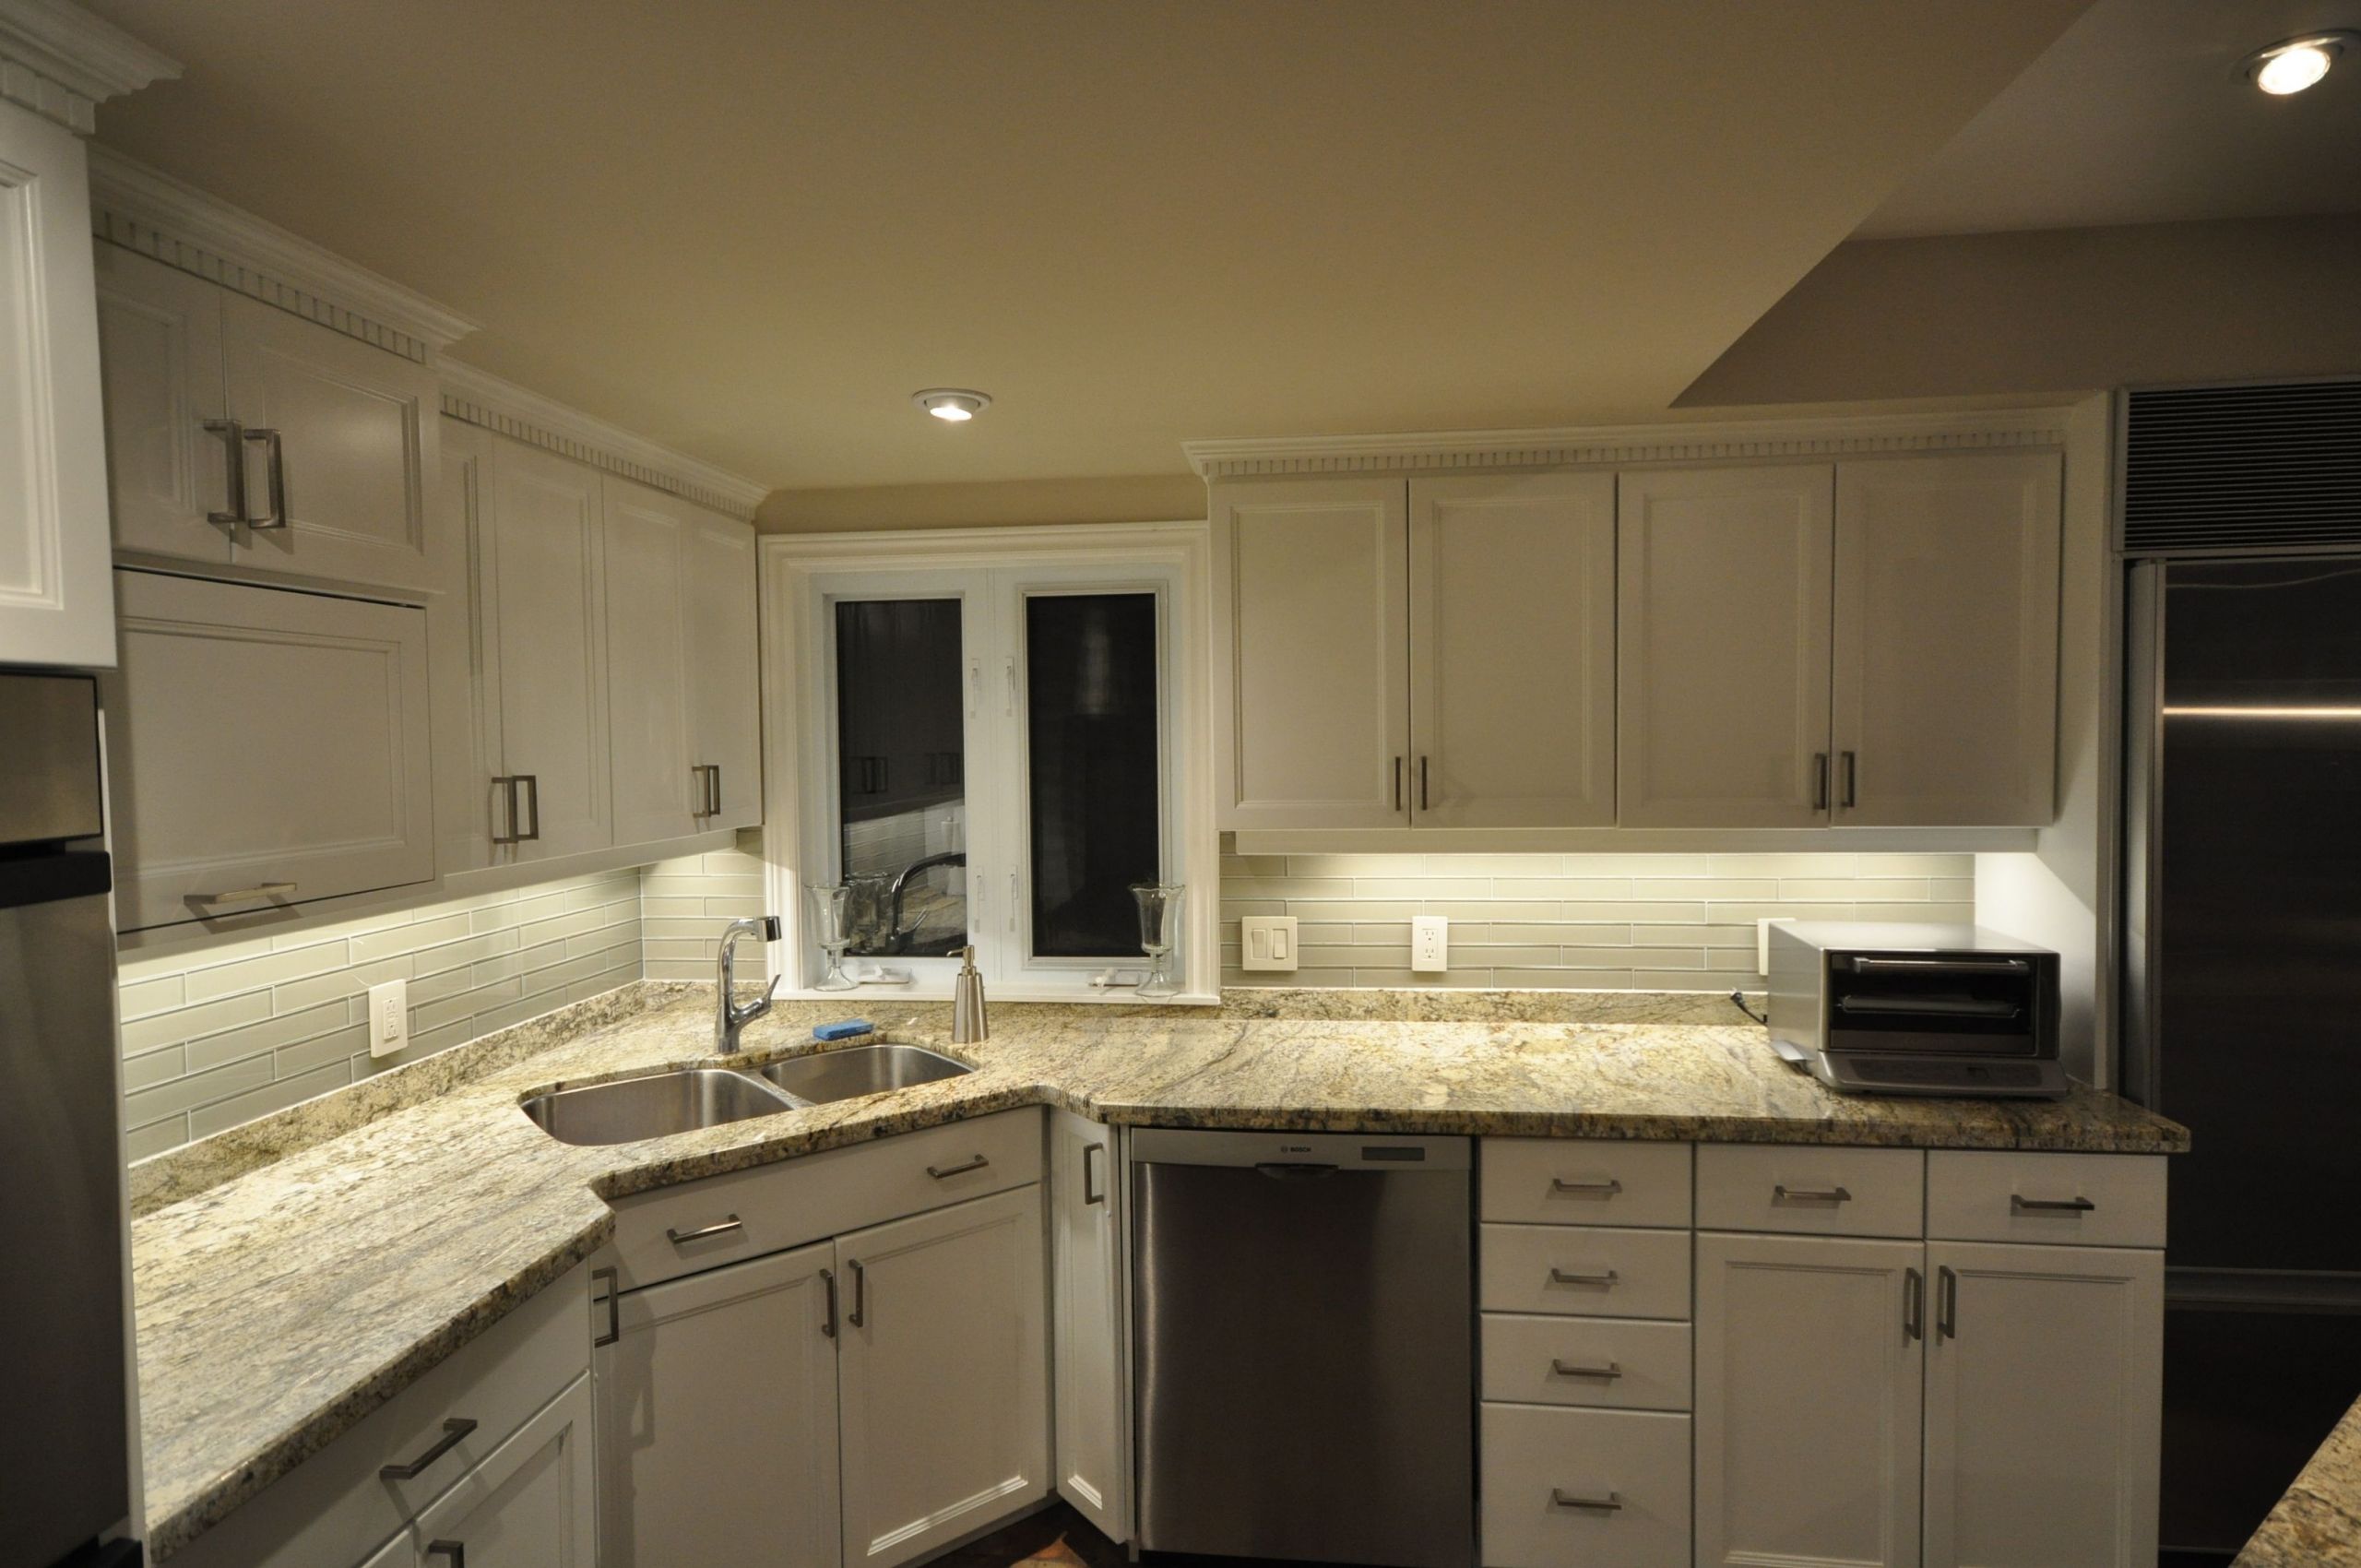 Kitchen Strip Lights Under Cabinet
 Pin on Under cabinet lighting projects